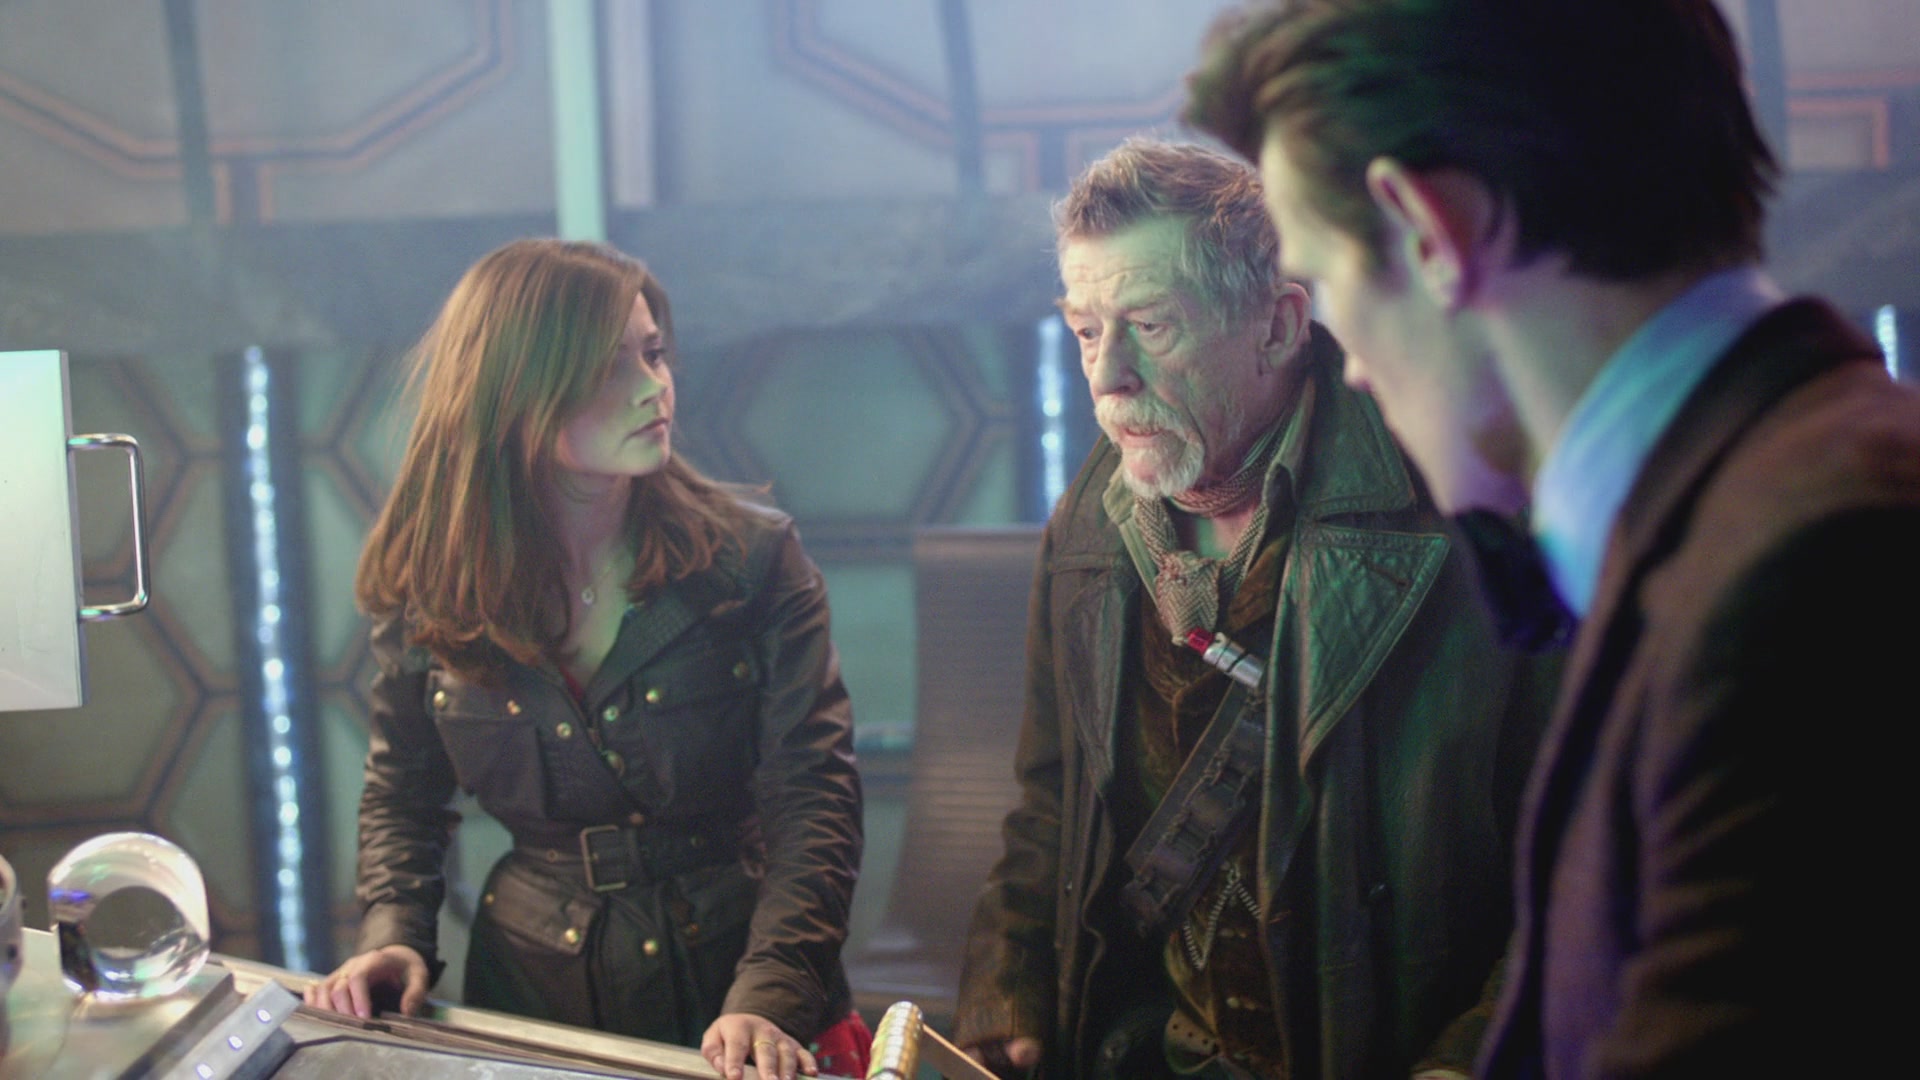 DayOfTheDoctor-Caps-0938.jpg